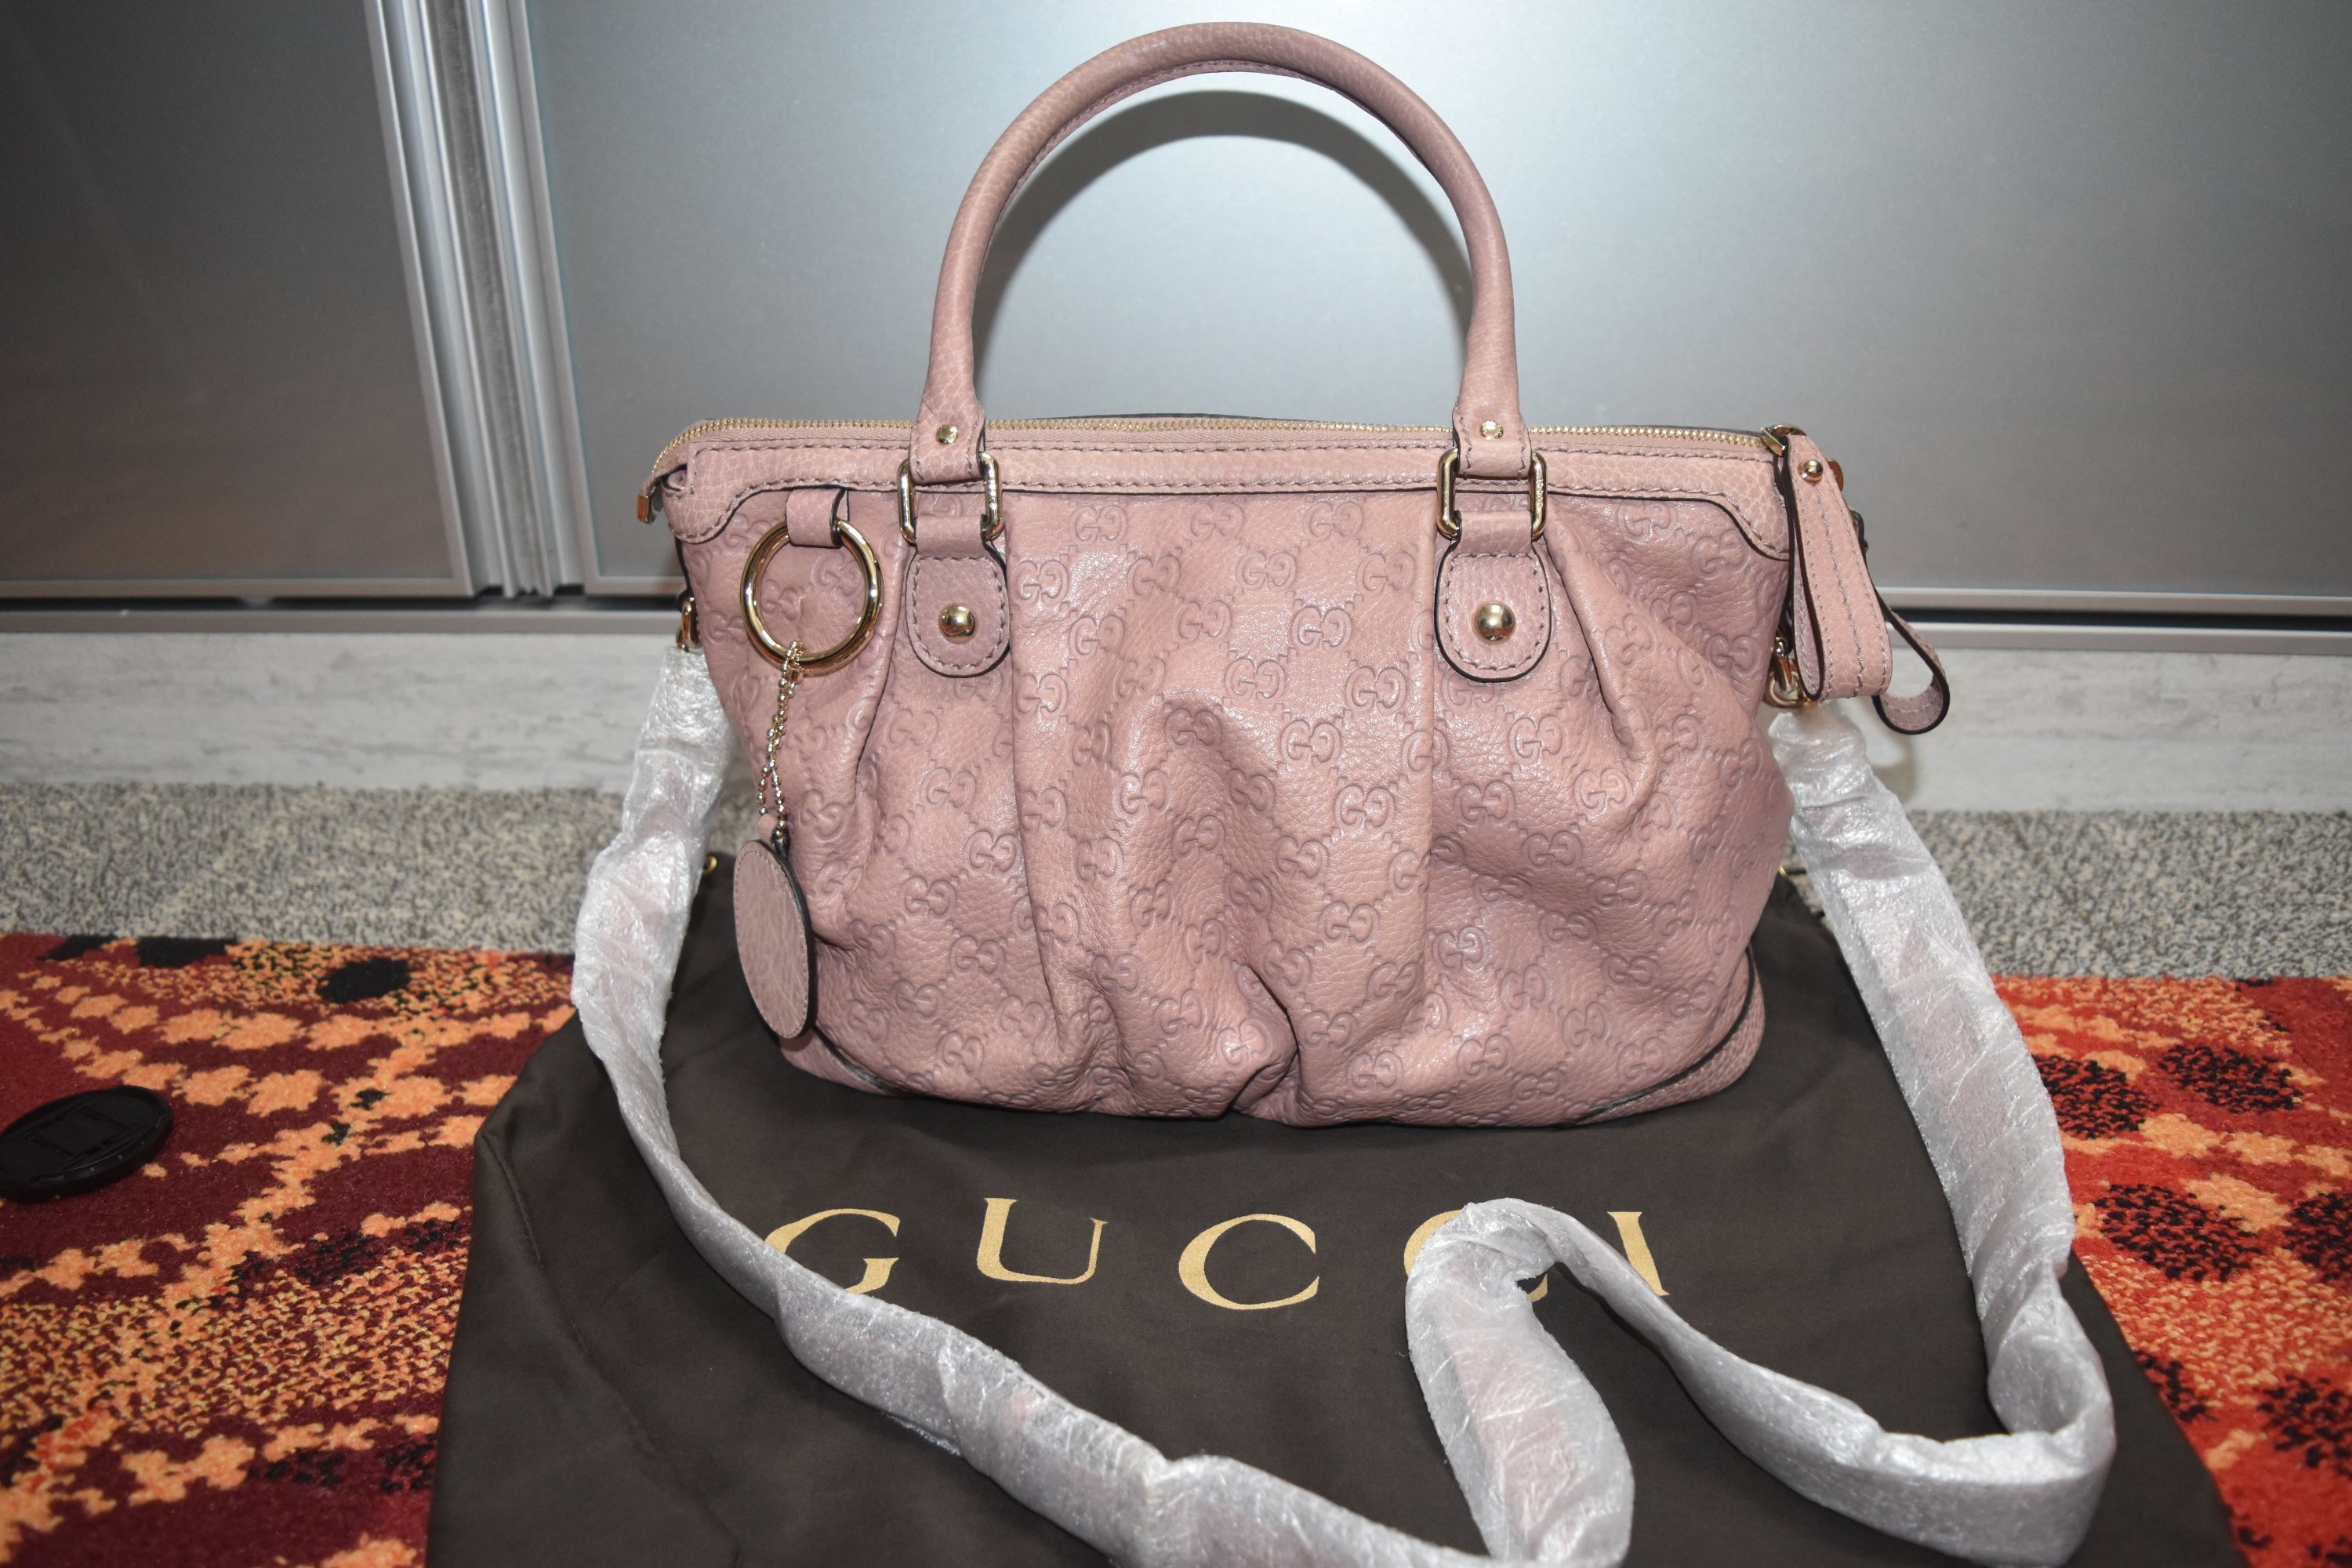 BN GUCCI FULL LEATHER BAG AT COST | SingaporeMotherhood Forum